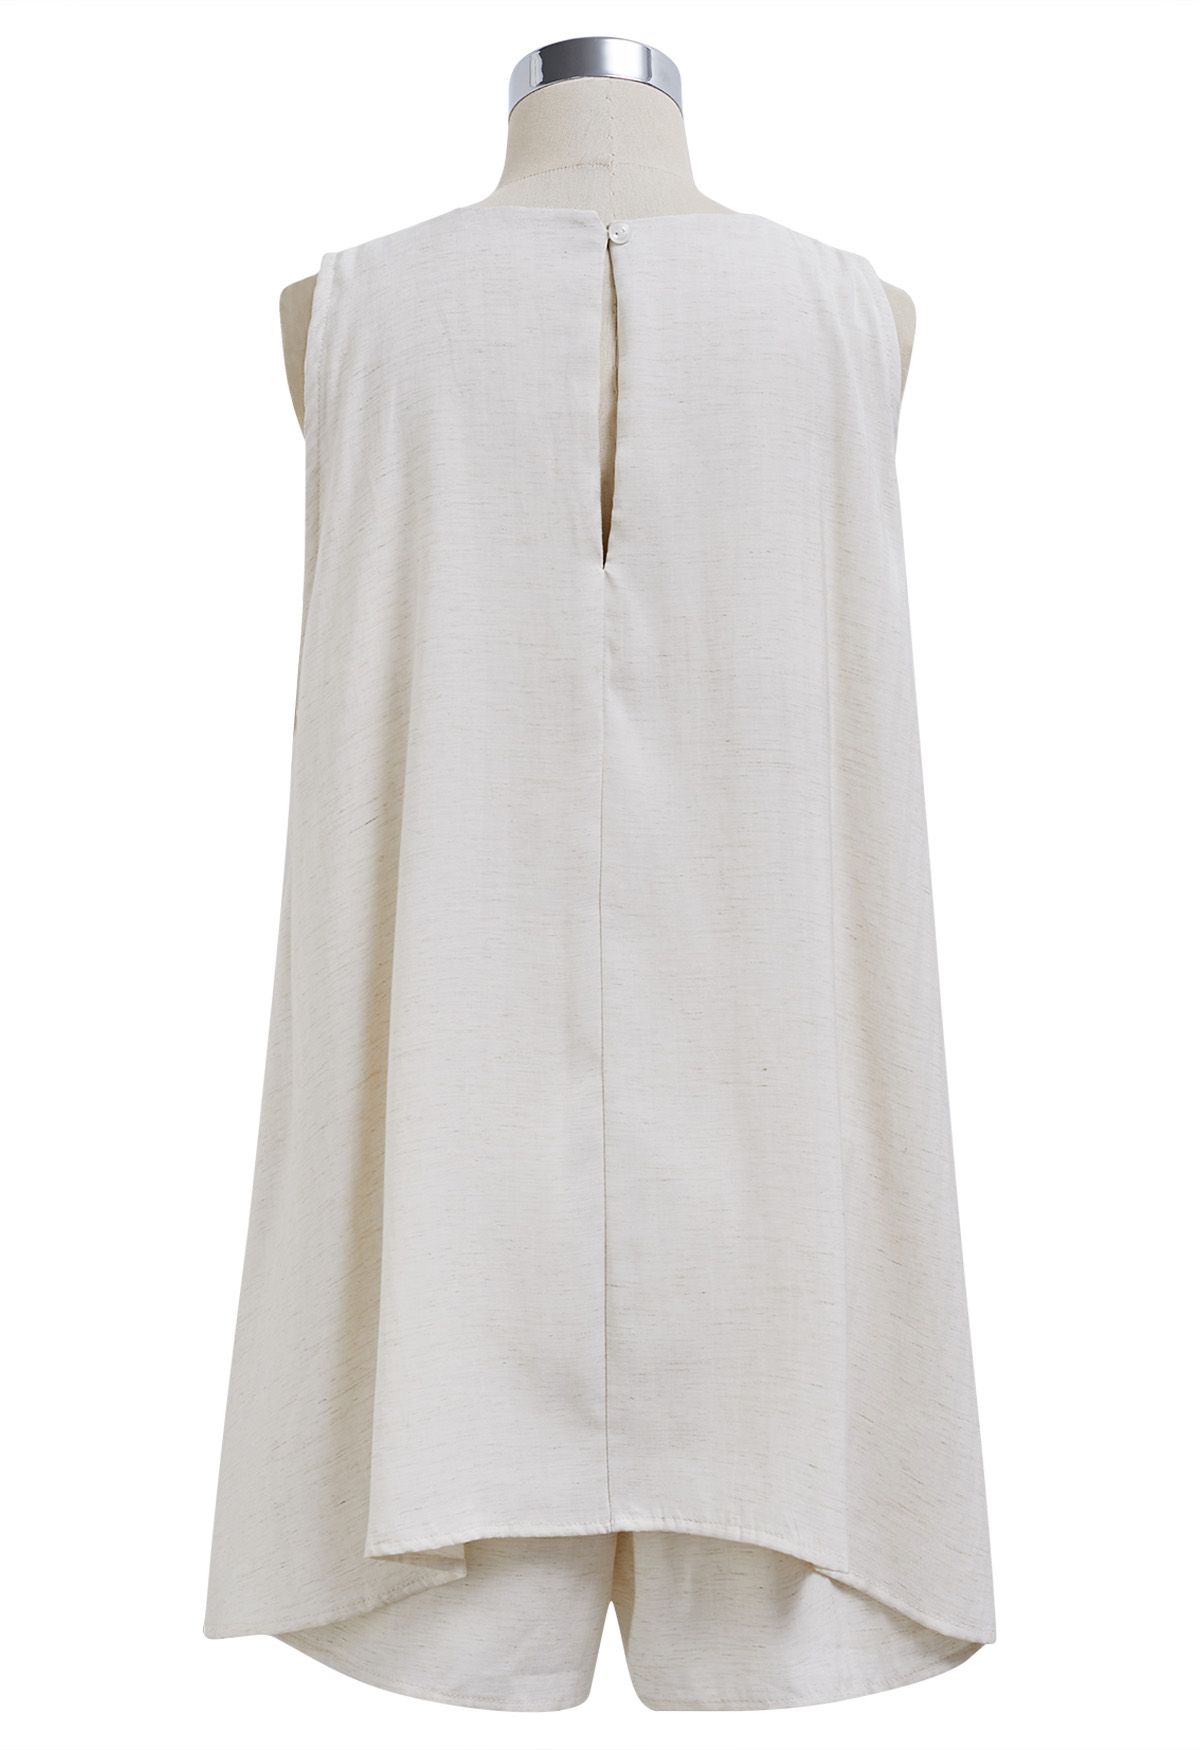 Pleats Sleeveless Top and Shorts Set in Ivory